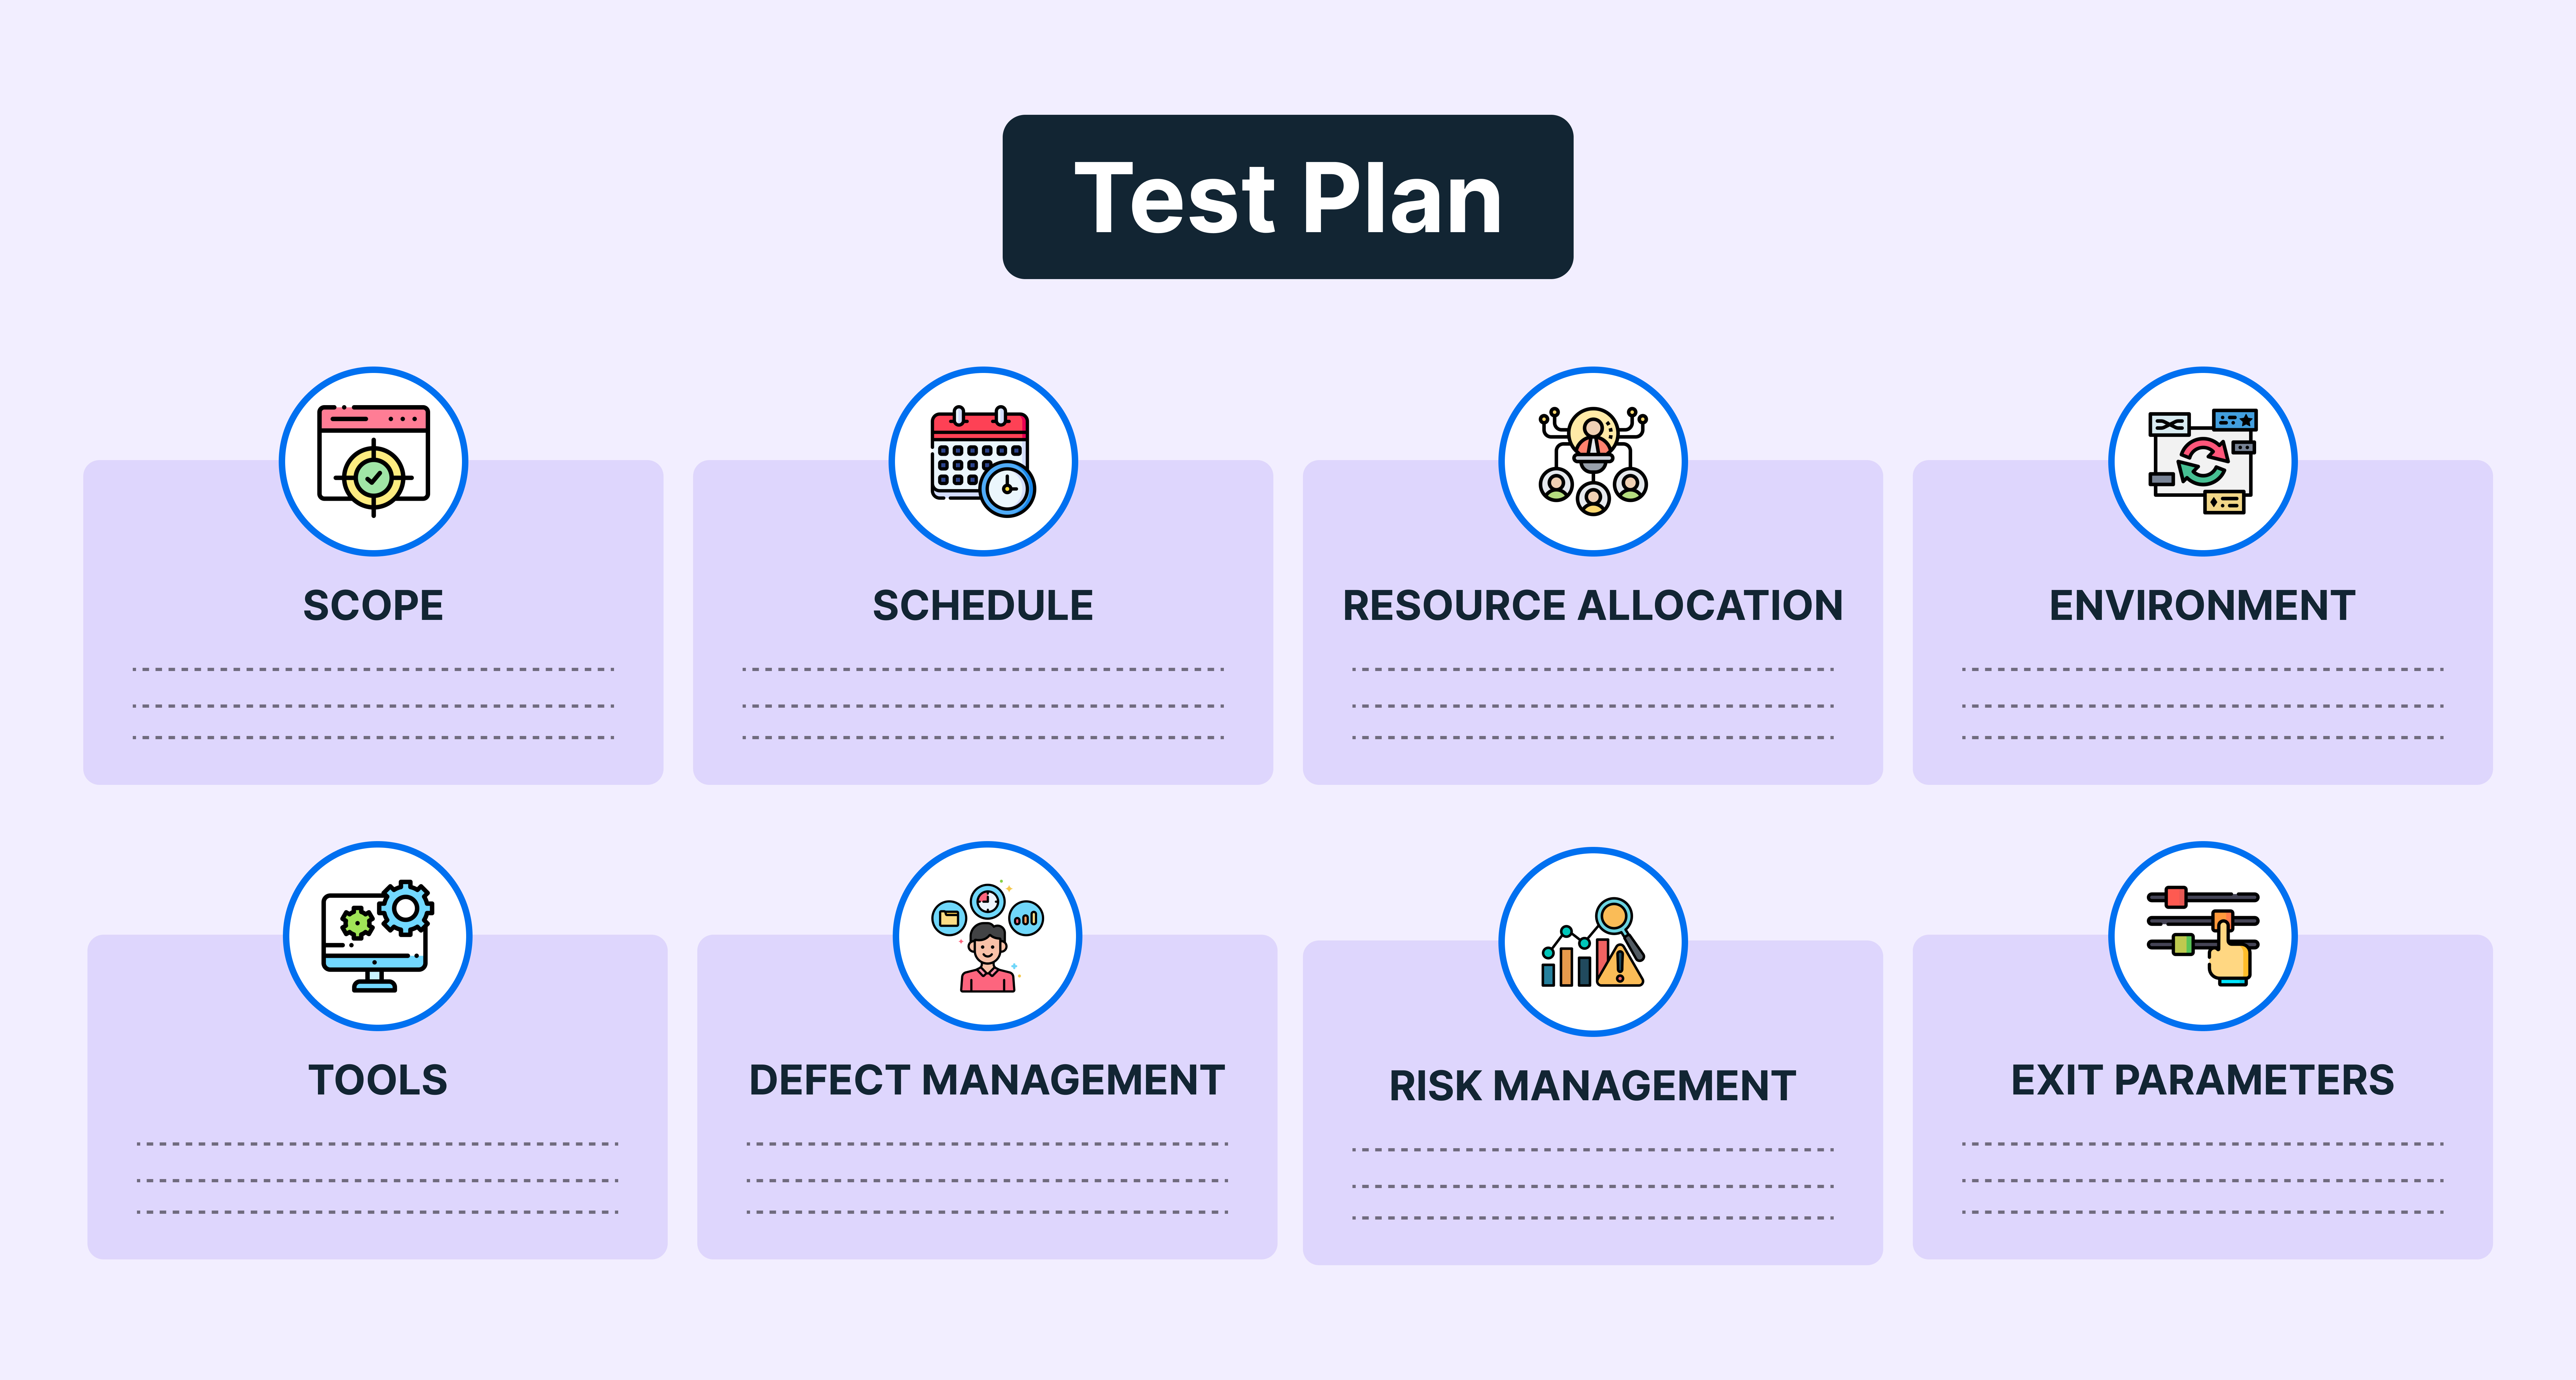 Components of Test Plan